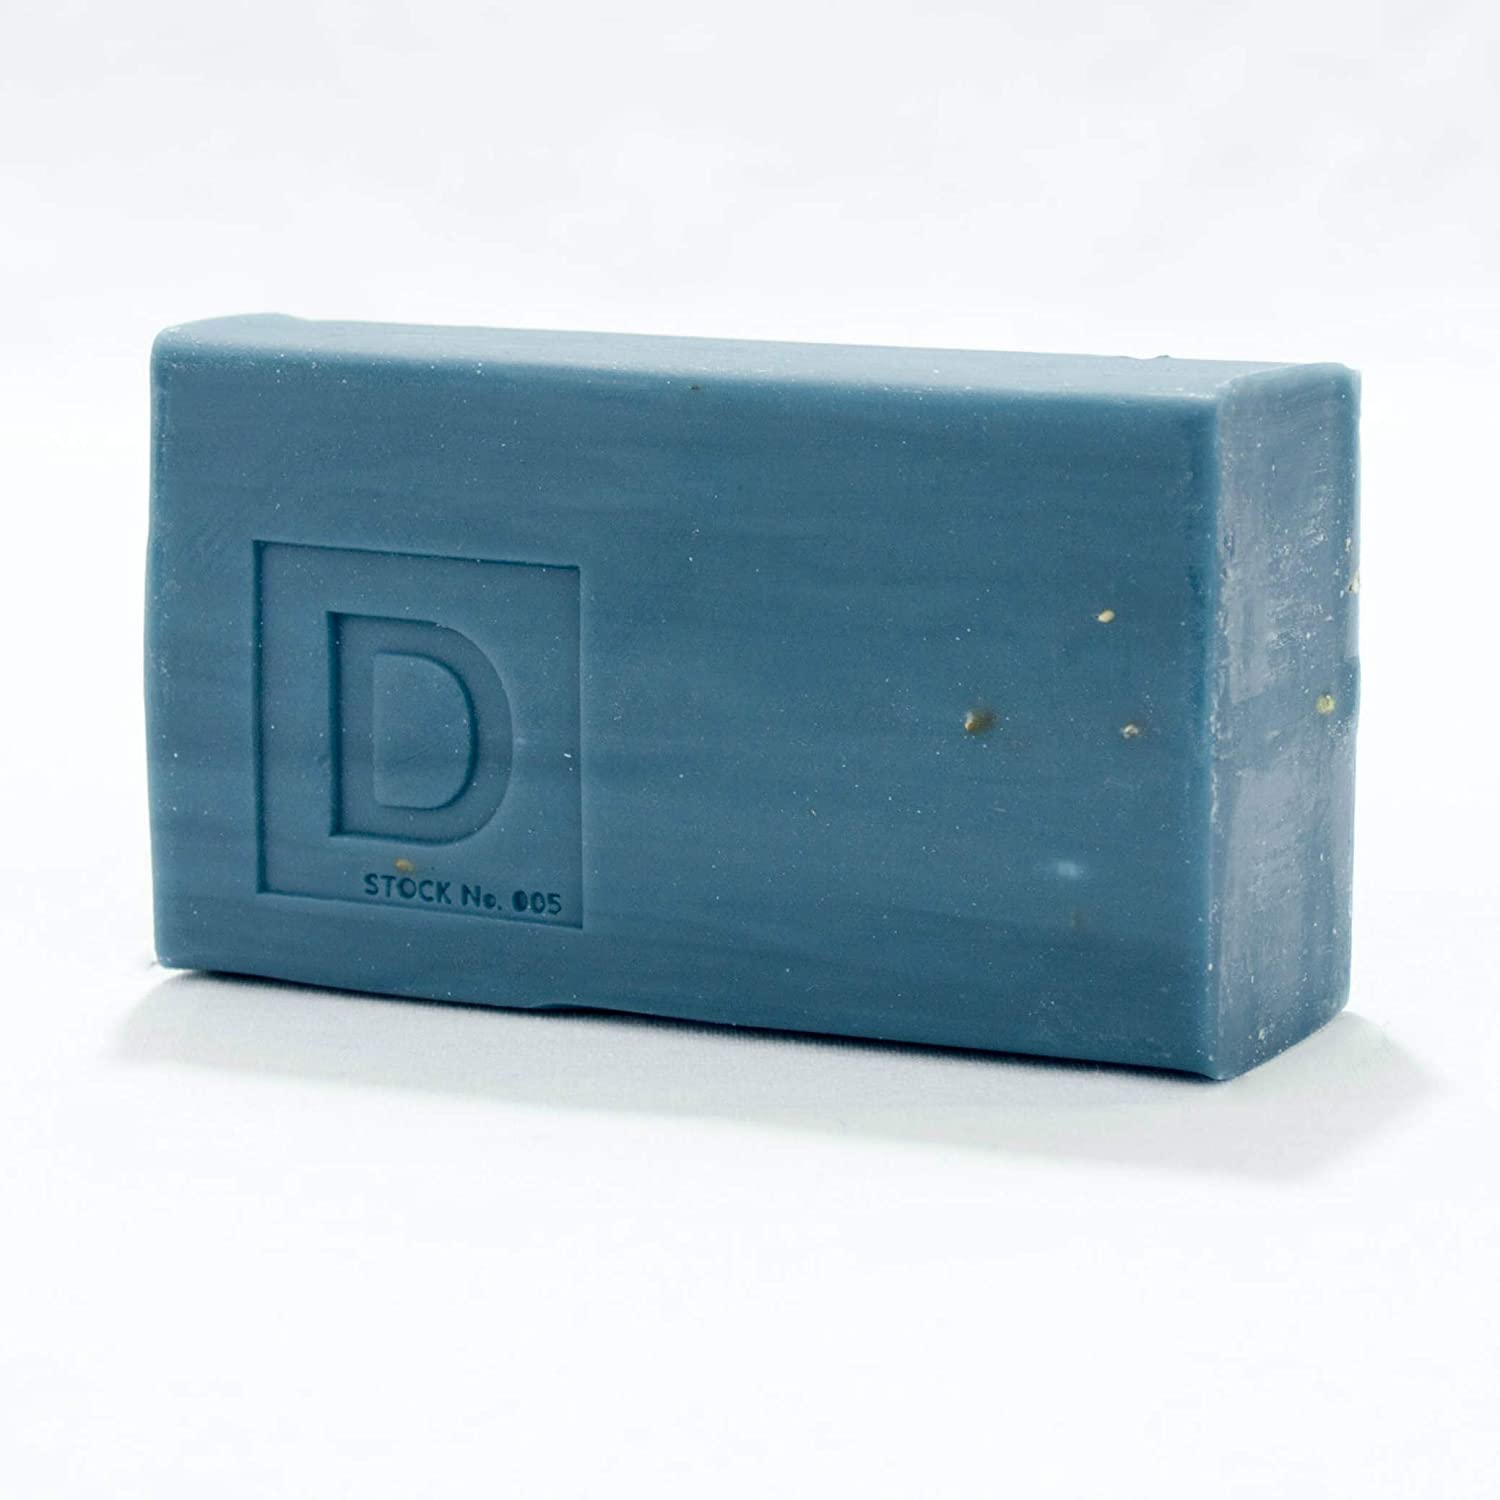 [In stock｜Free shipping] Duke Cannon - Oversized Brick Soap Navy Supreme Fragrance丨2 World Wars Limited Edition丨LIMITED EDITION WWII-ERA BIG ASS BRICK OF SOAP NAVAL SUPREMACY